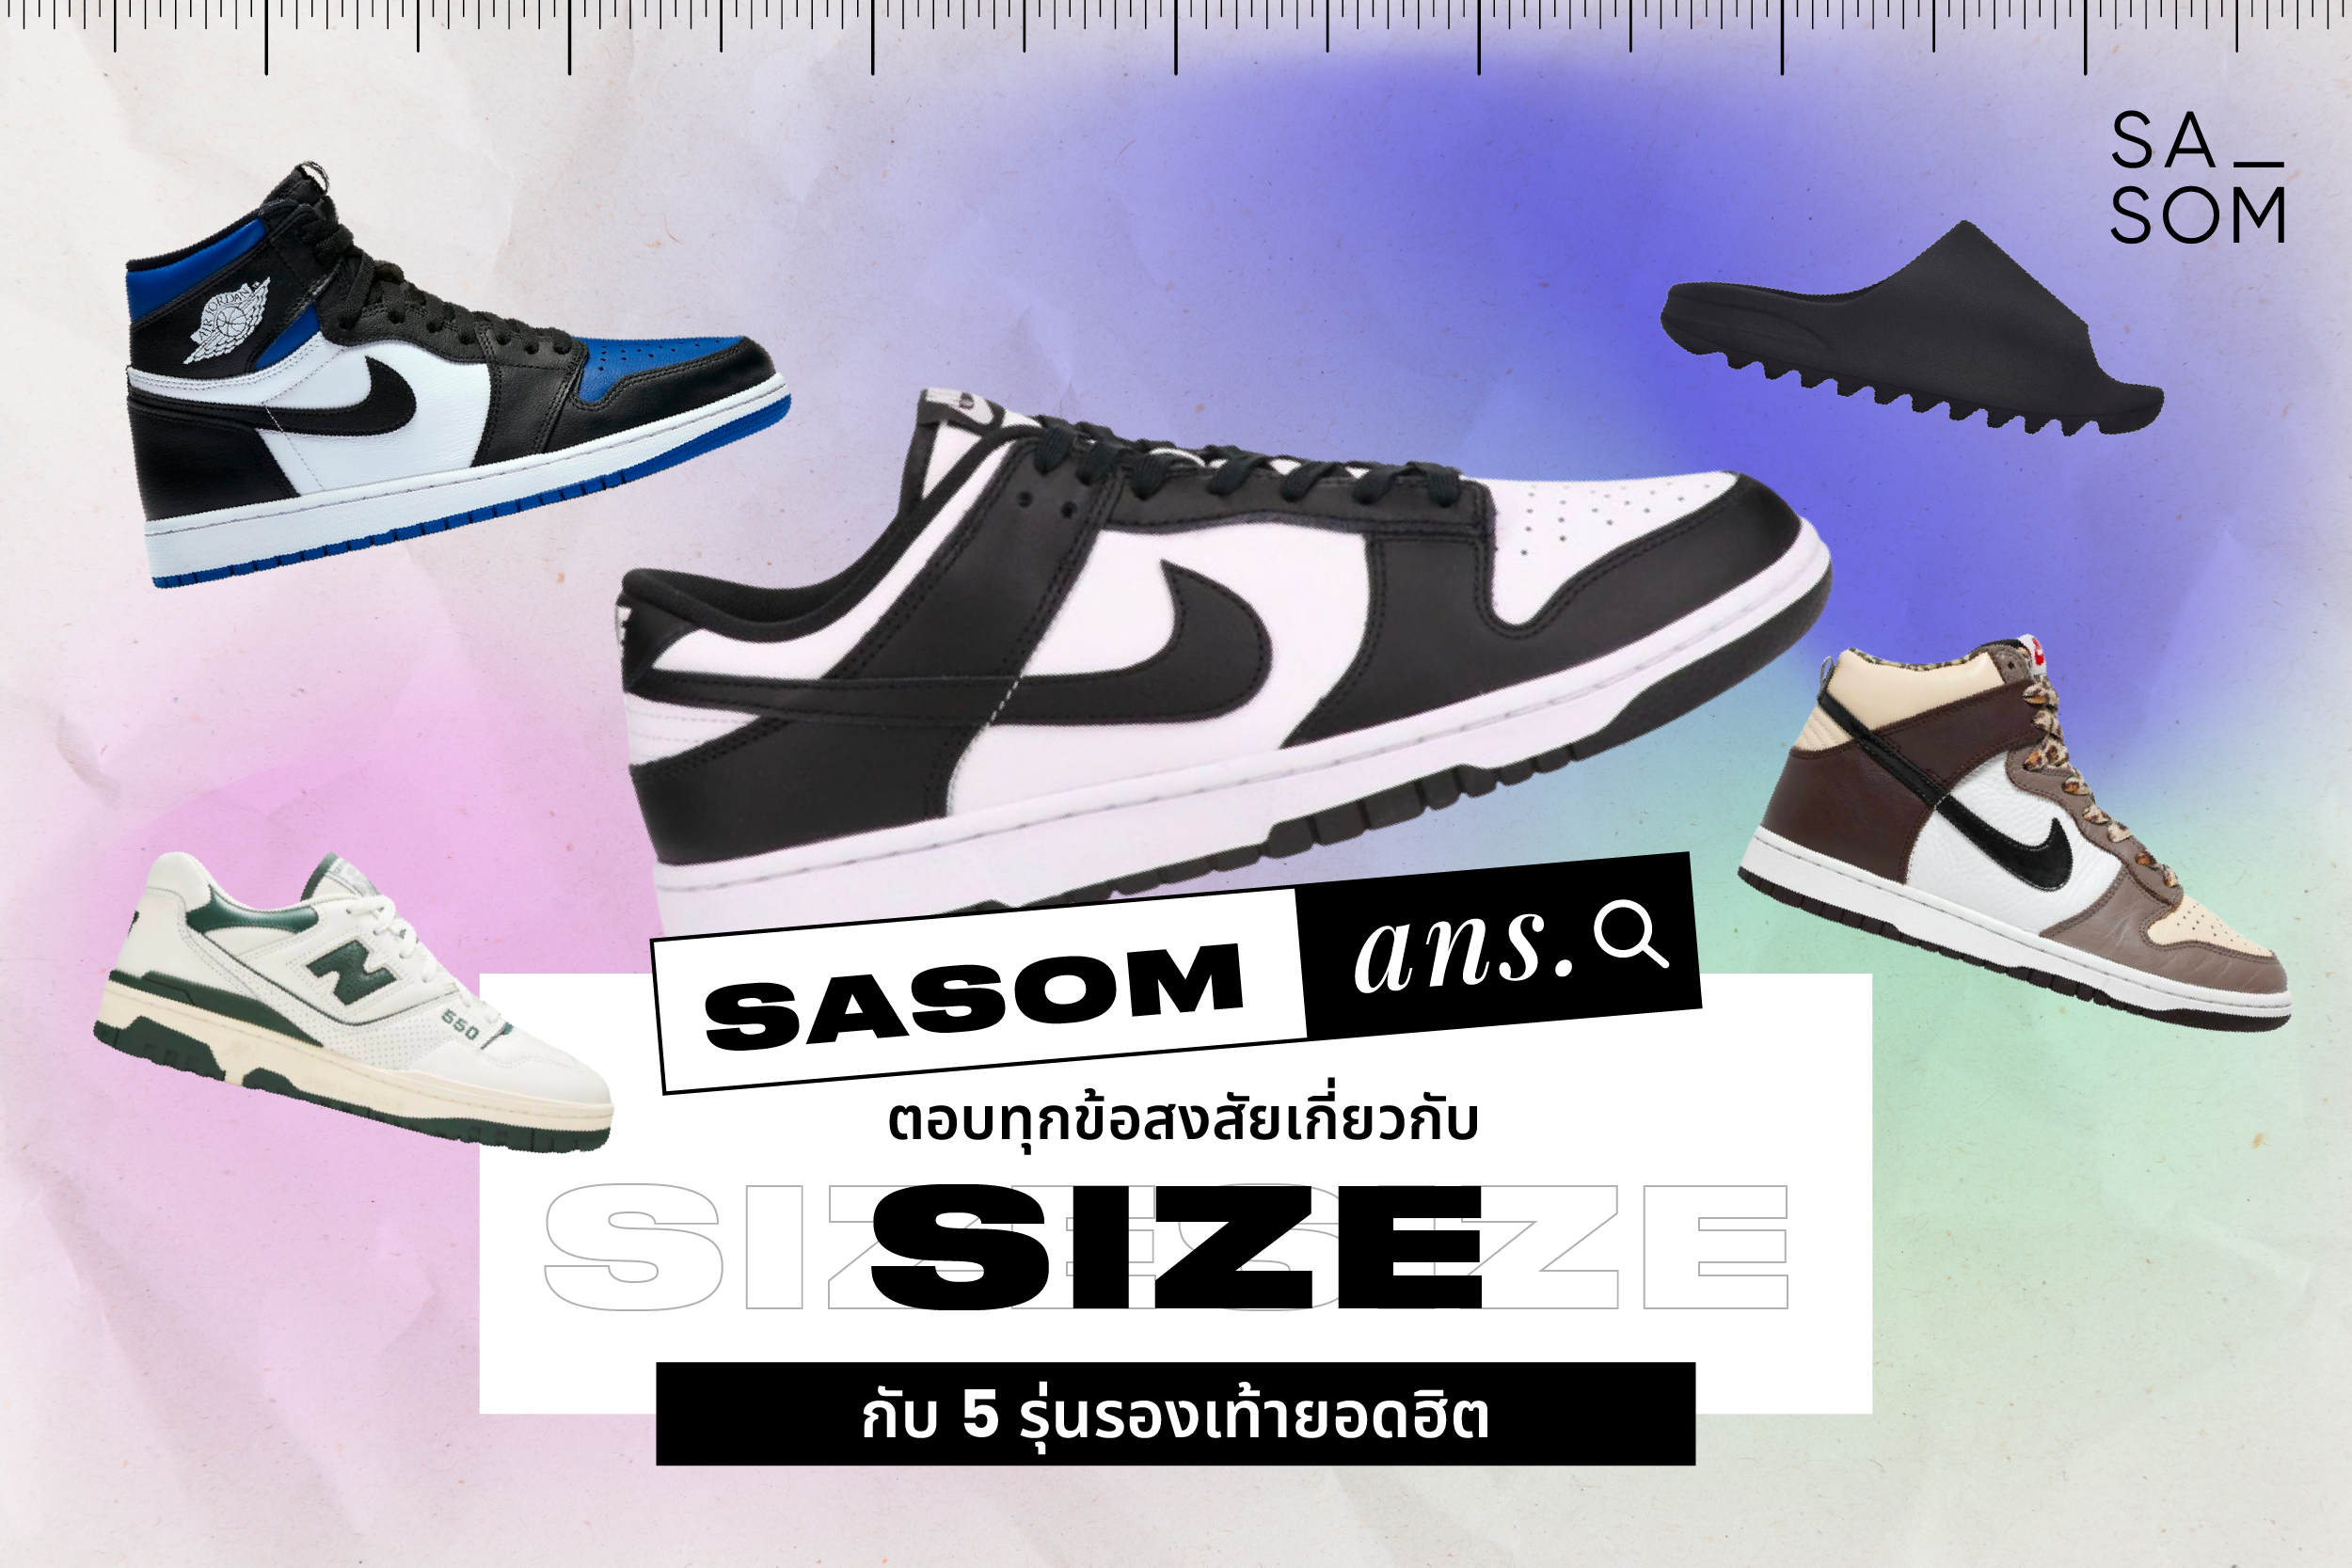 The Ultimate Sneakers Sizing & Fit Guide